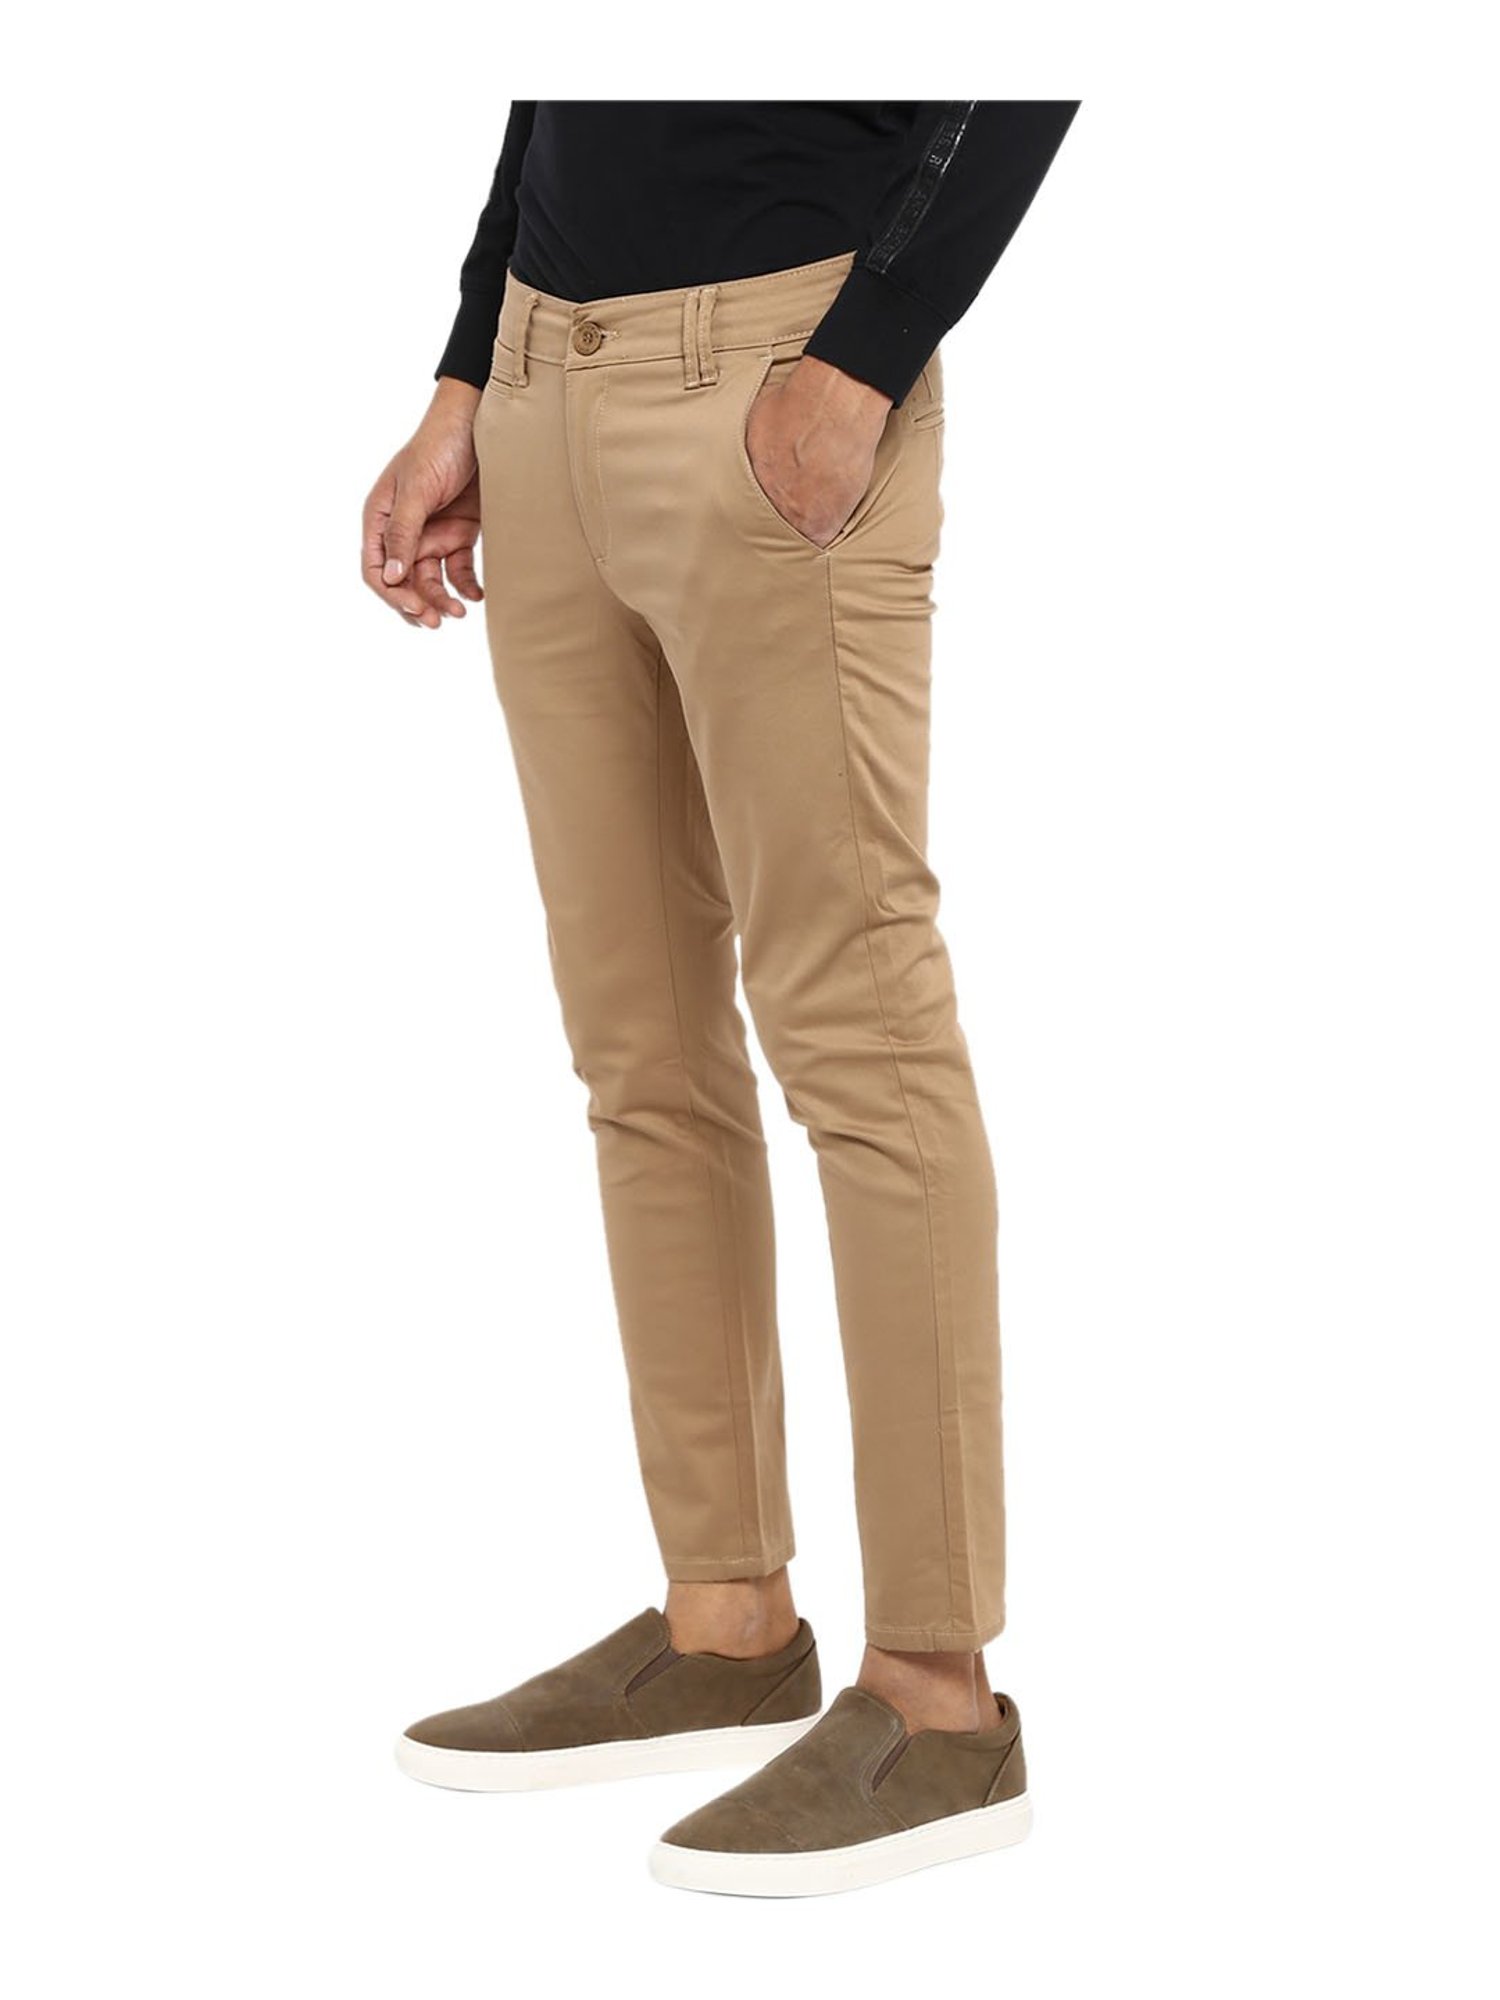 Mufti Men Trousers | Casual Cotton Pants for Men Online | Cotton casual  pants, Cotton pants men, Mens trousers casual